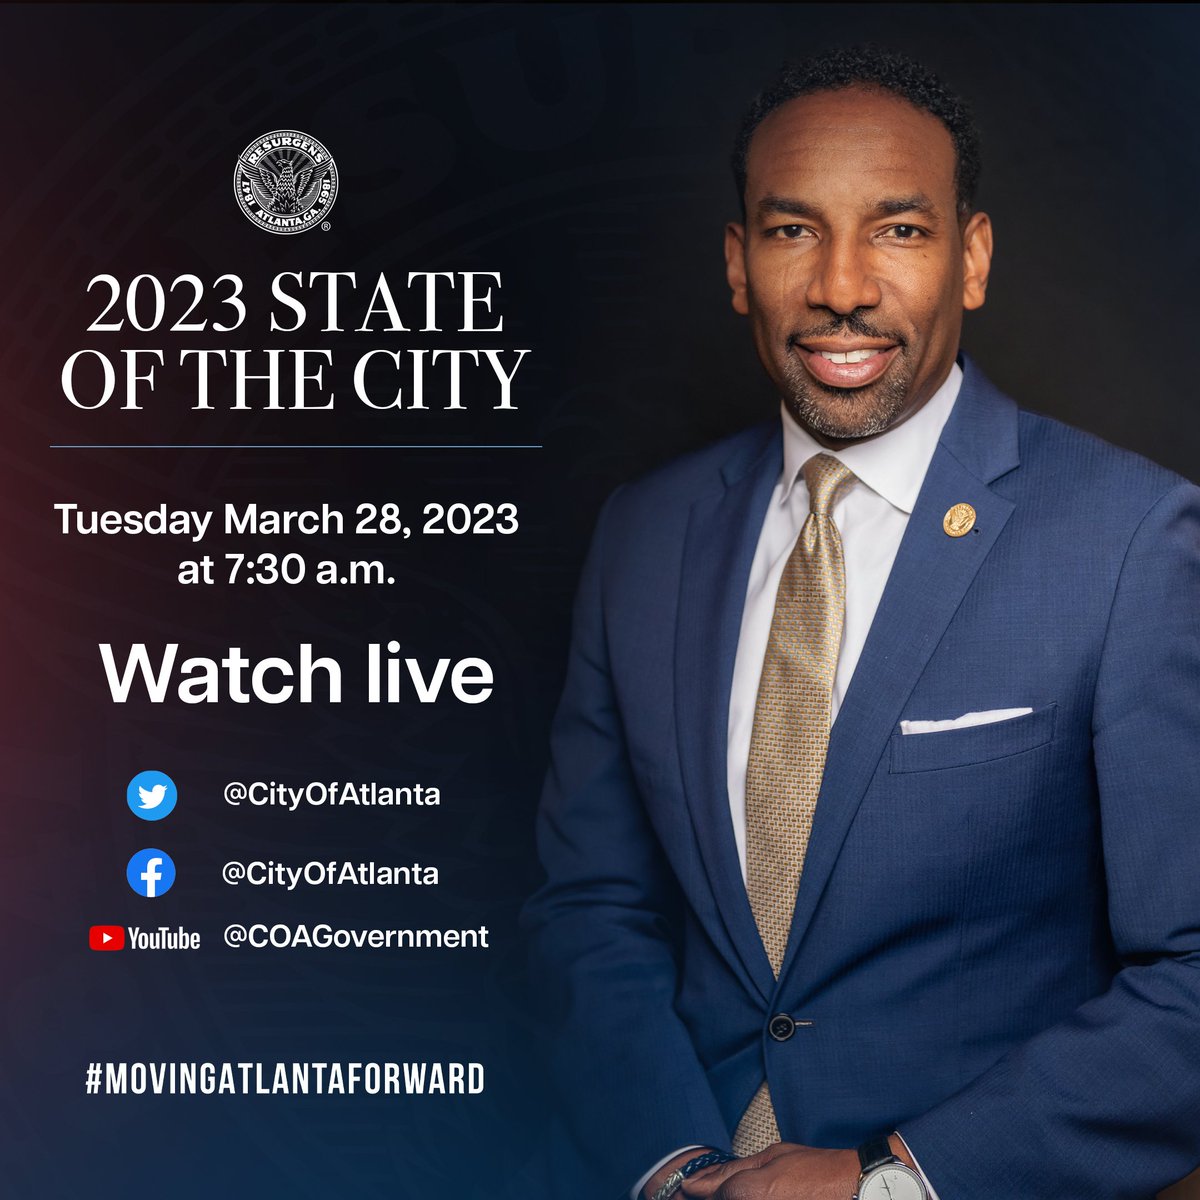 City of Atlanta, GA on Twitter "Join us LIVE today at 730am for Mayor